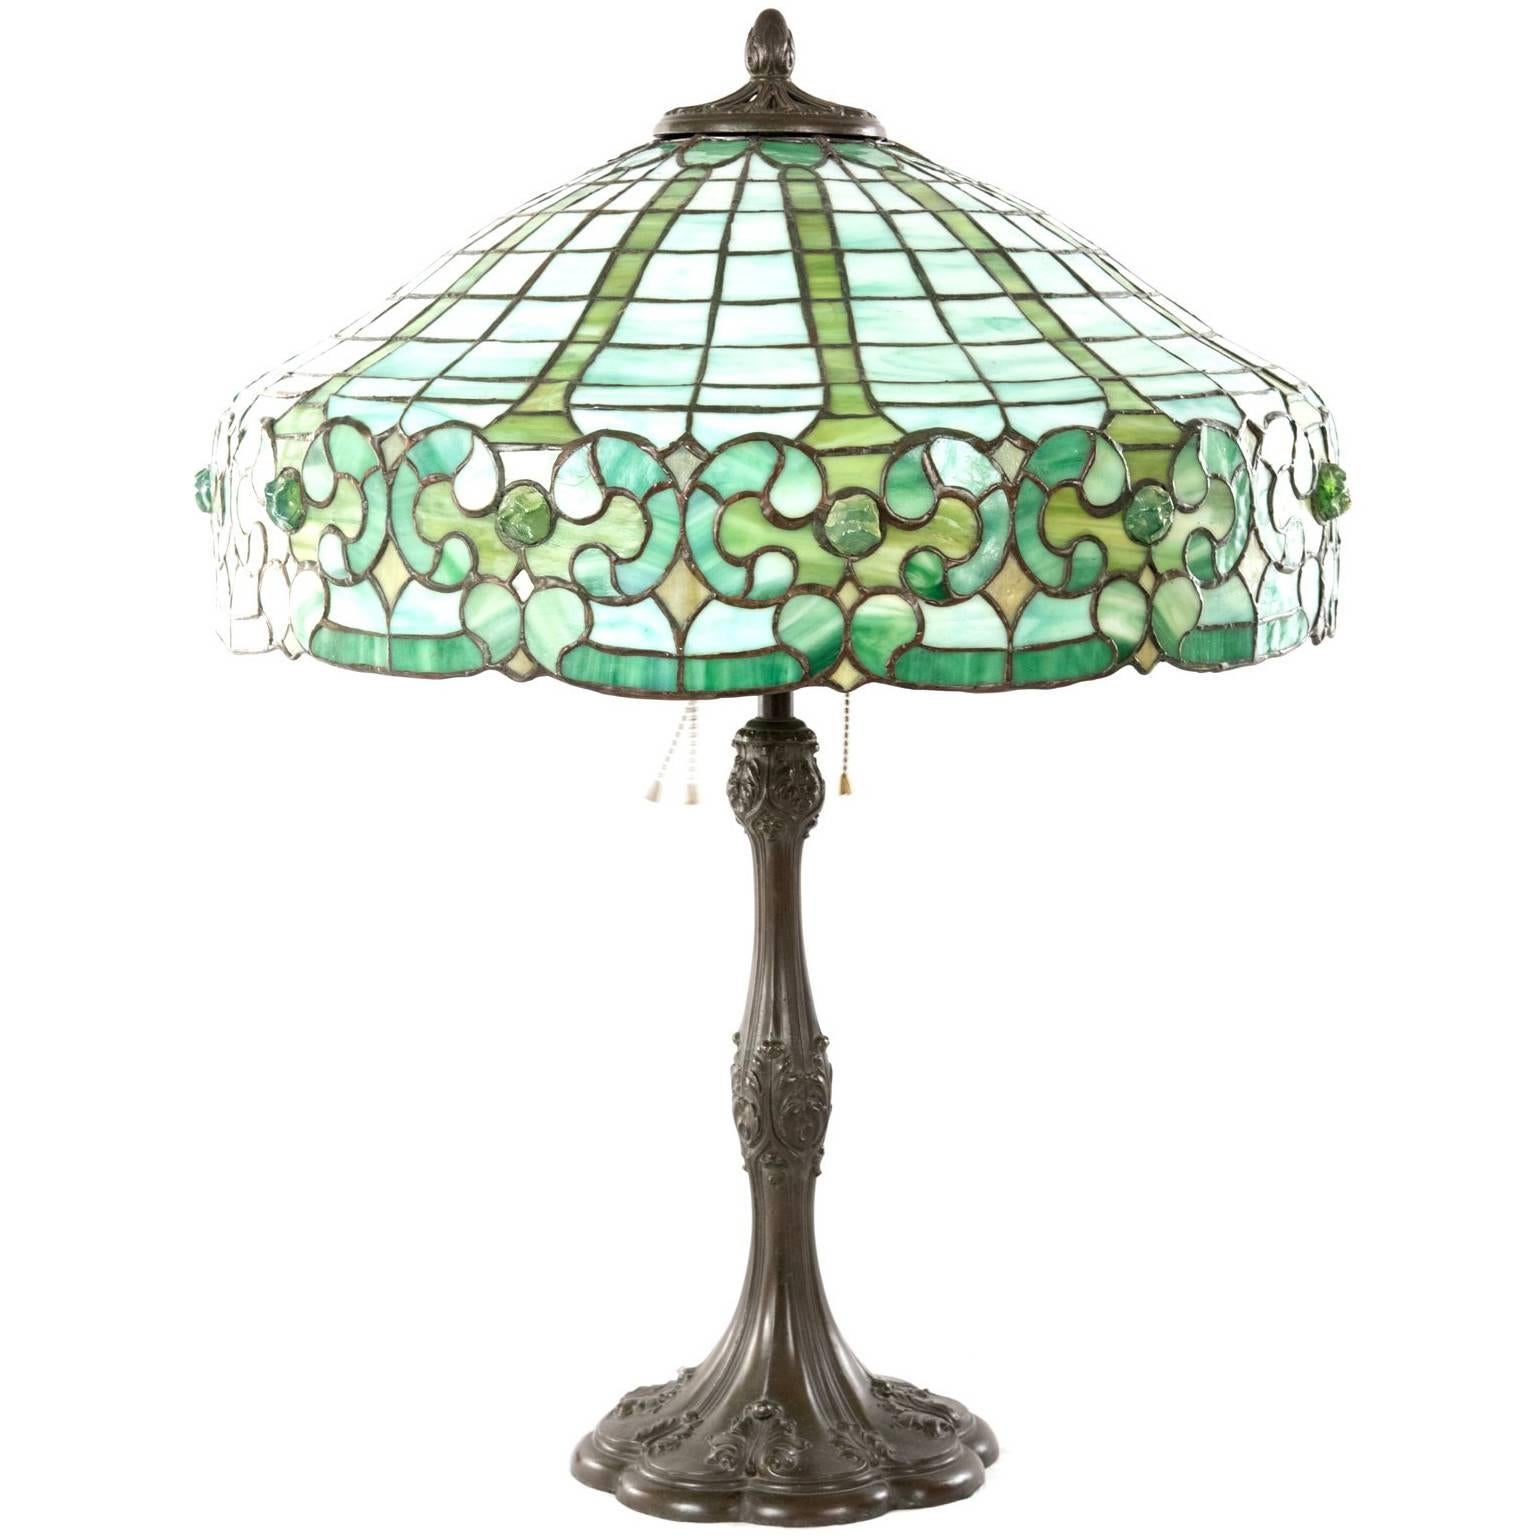 Whaley Stained Glass and Bronze Table Lamp